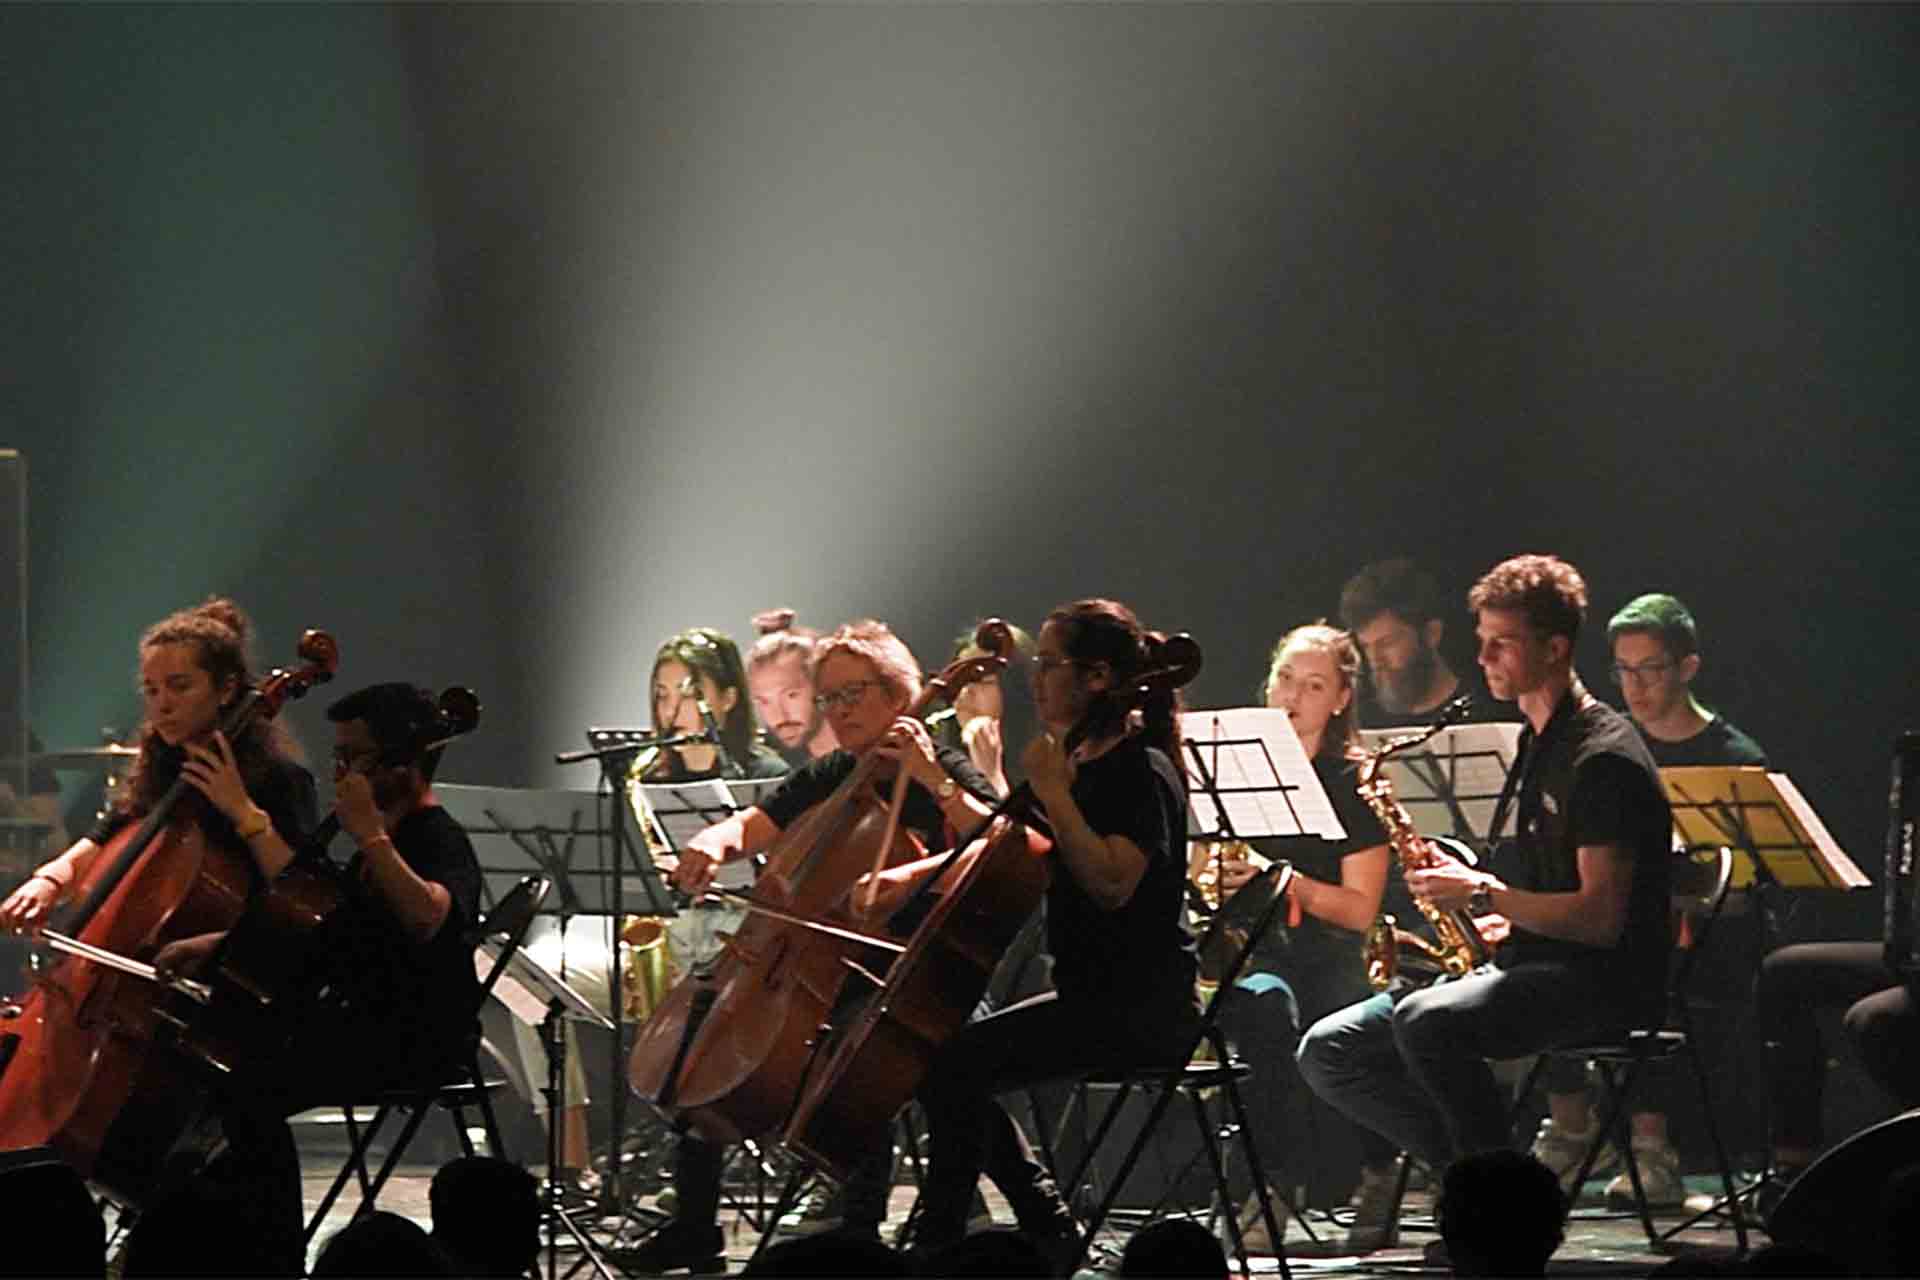 MYEO - Moving Youth European Orchestra